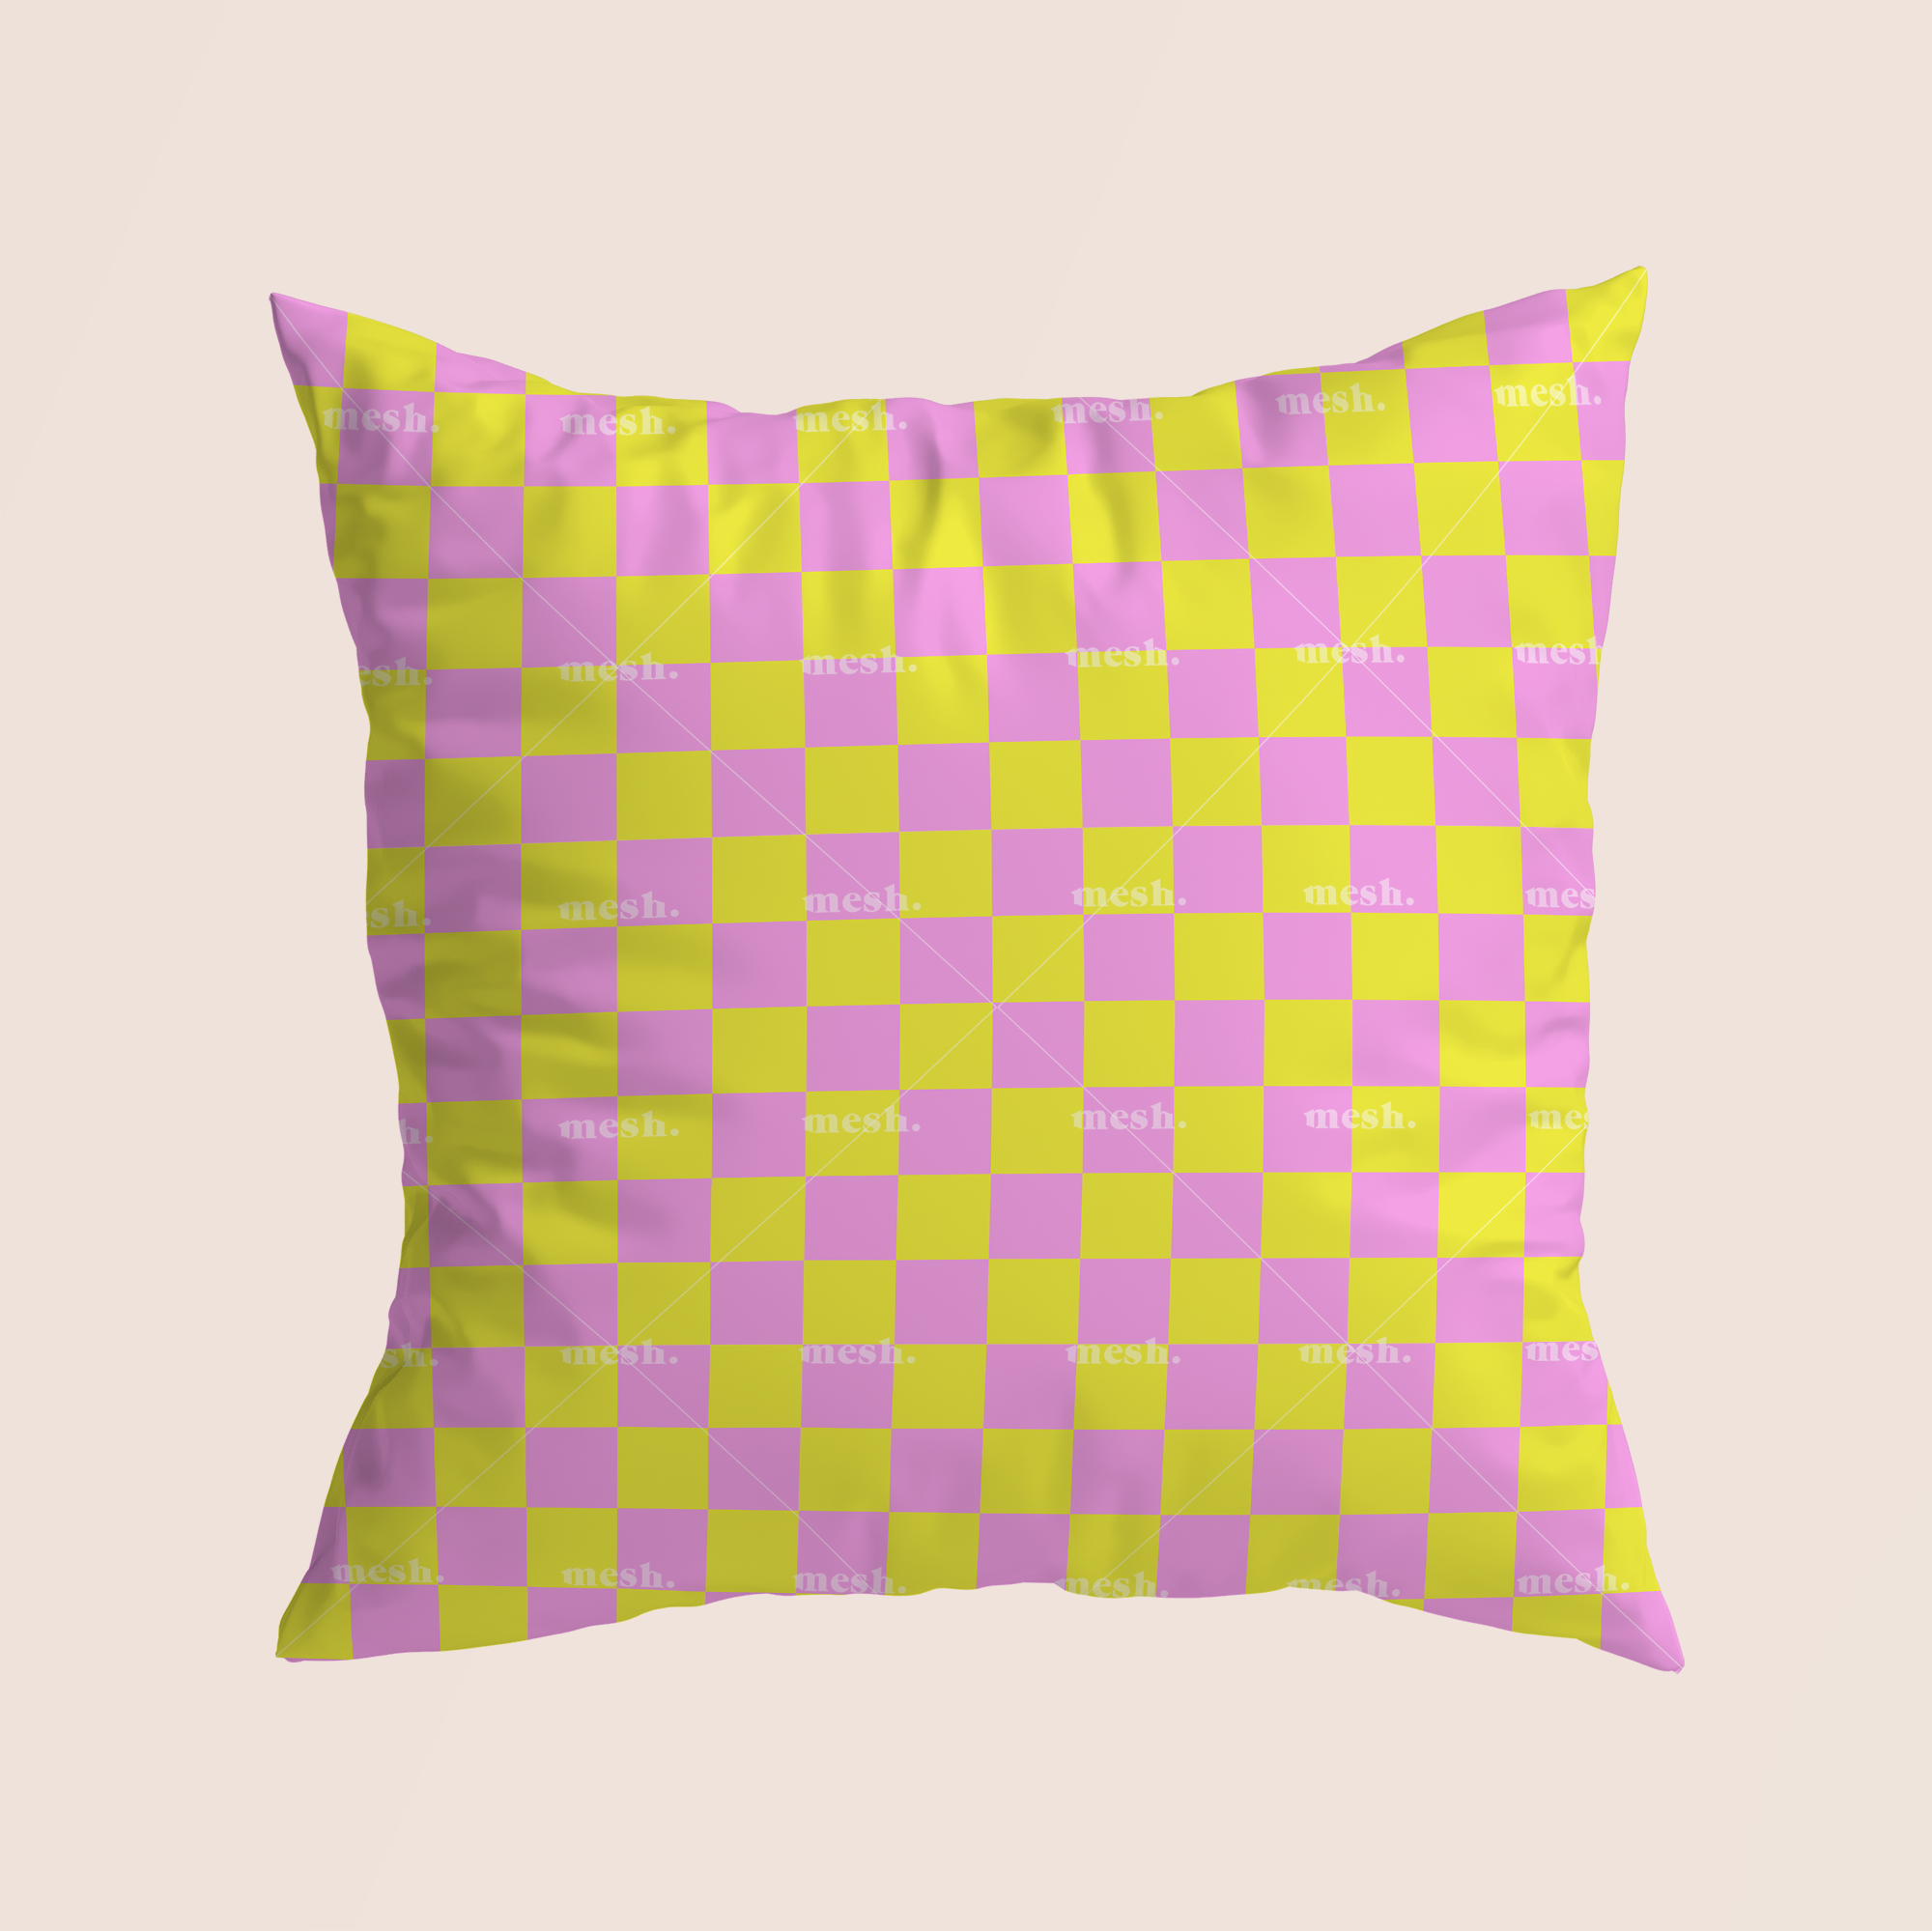 Chess mood in pink and yellow pattern design printed on recycled fabric canvas mockup